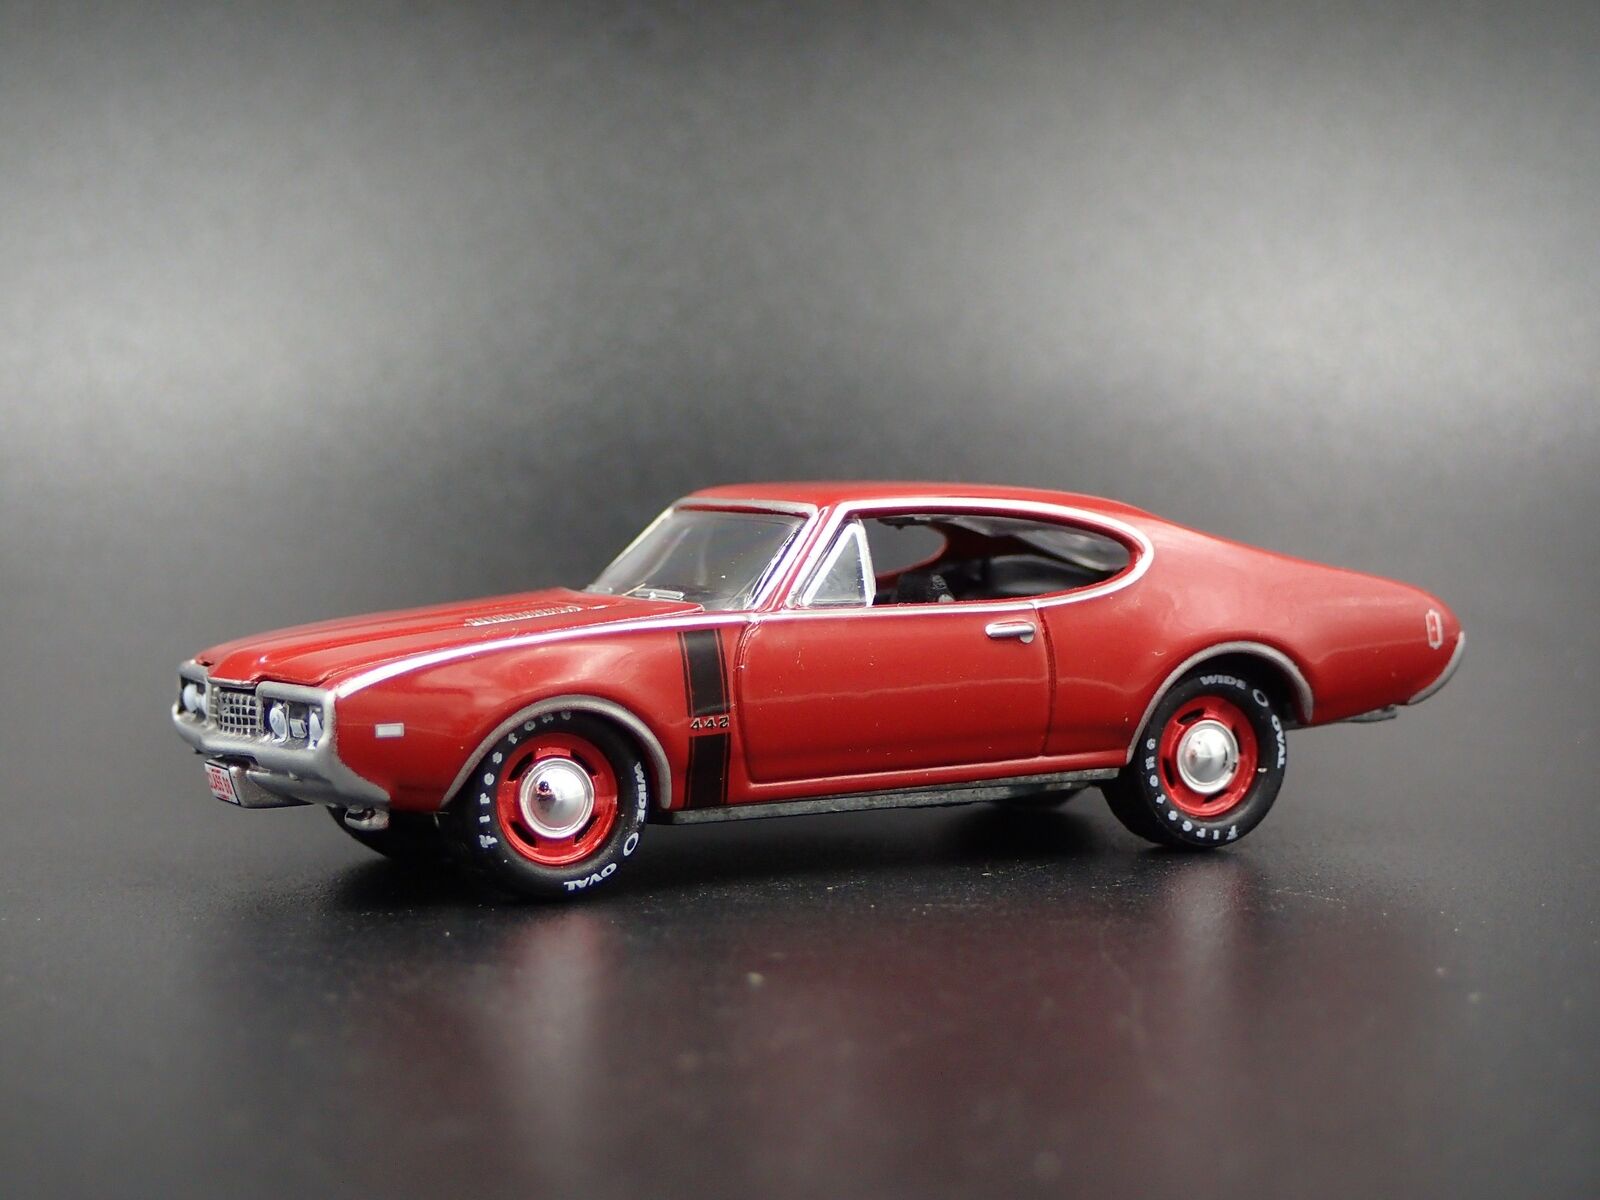 1968 68 OLDS OLDSMOBILE 442 W30 1/64 SCALE COLLECTIBLE DIORAMA DIECAST MODEL CAR